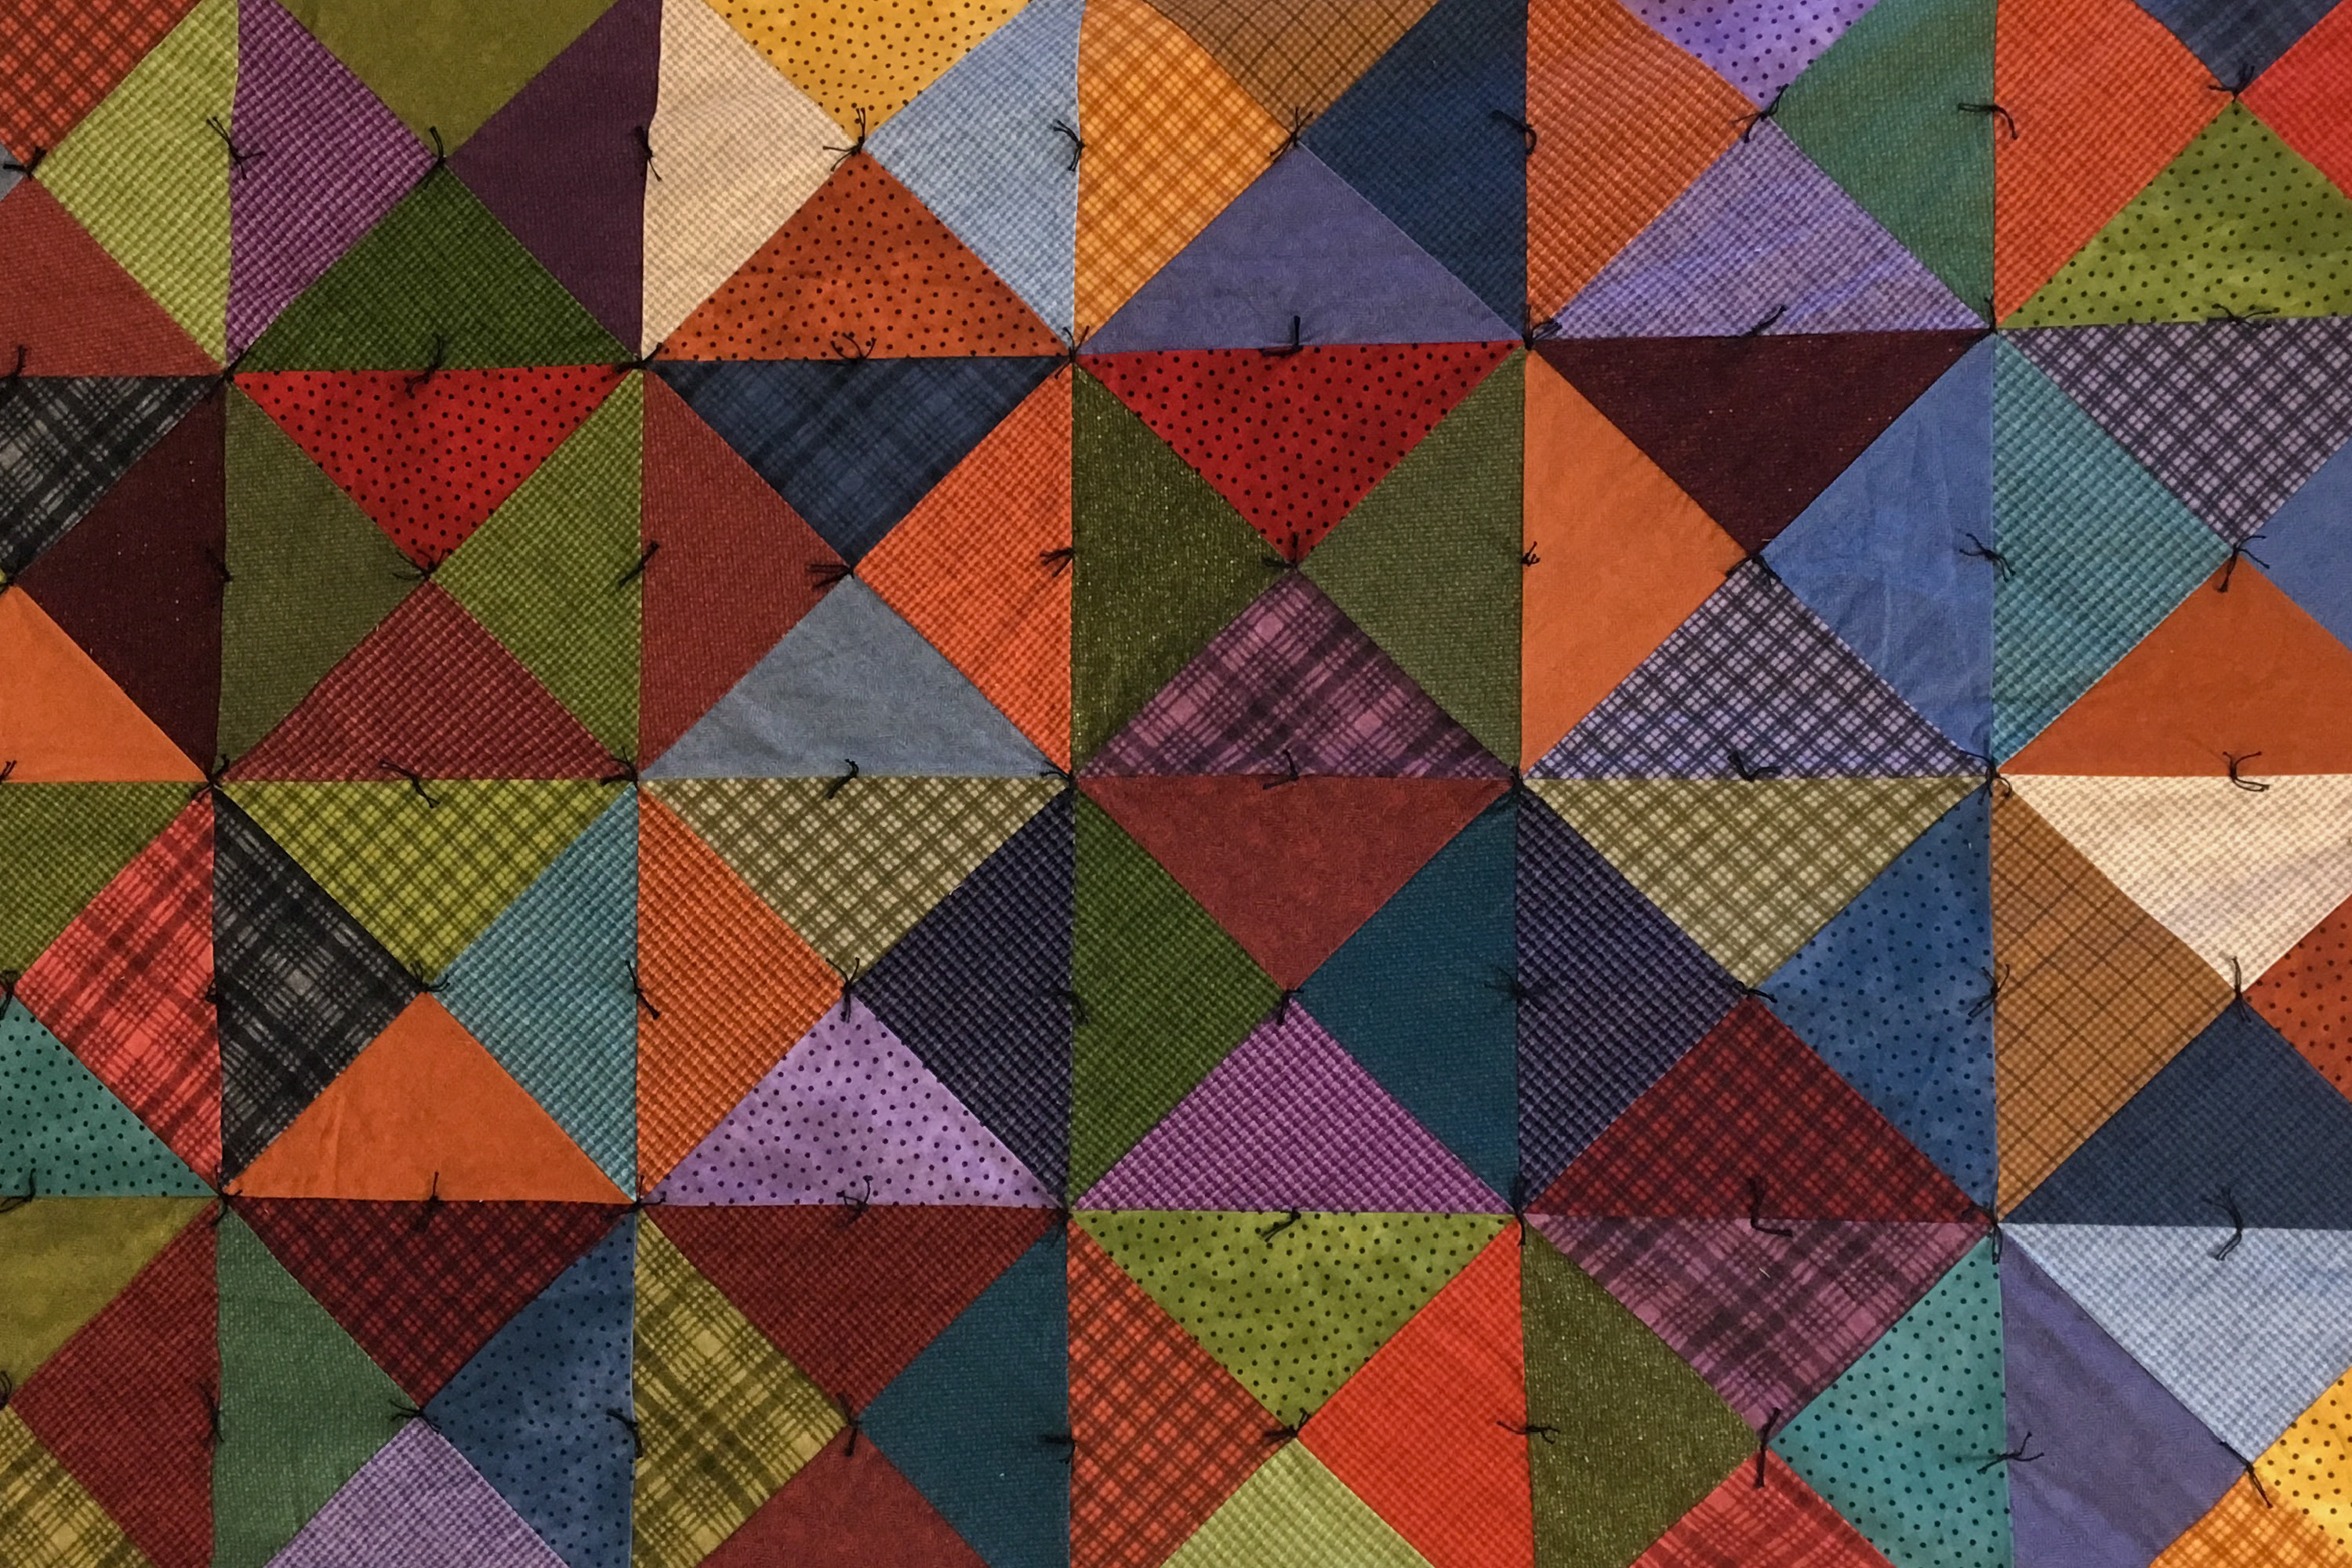 A photo of a colorful quilt made with squares and triangles.